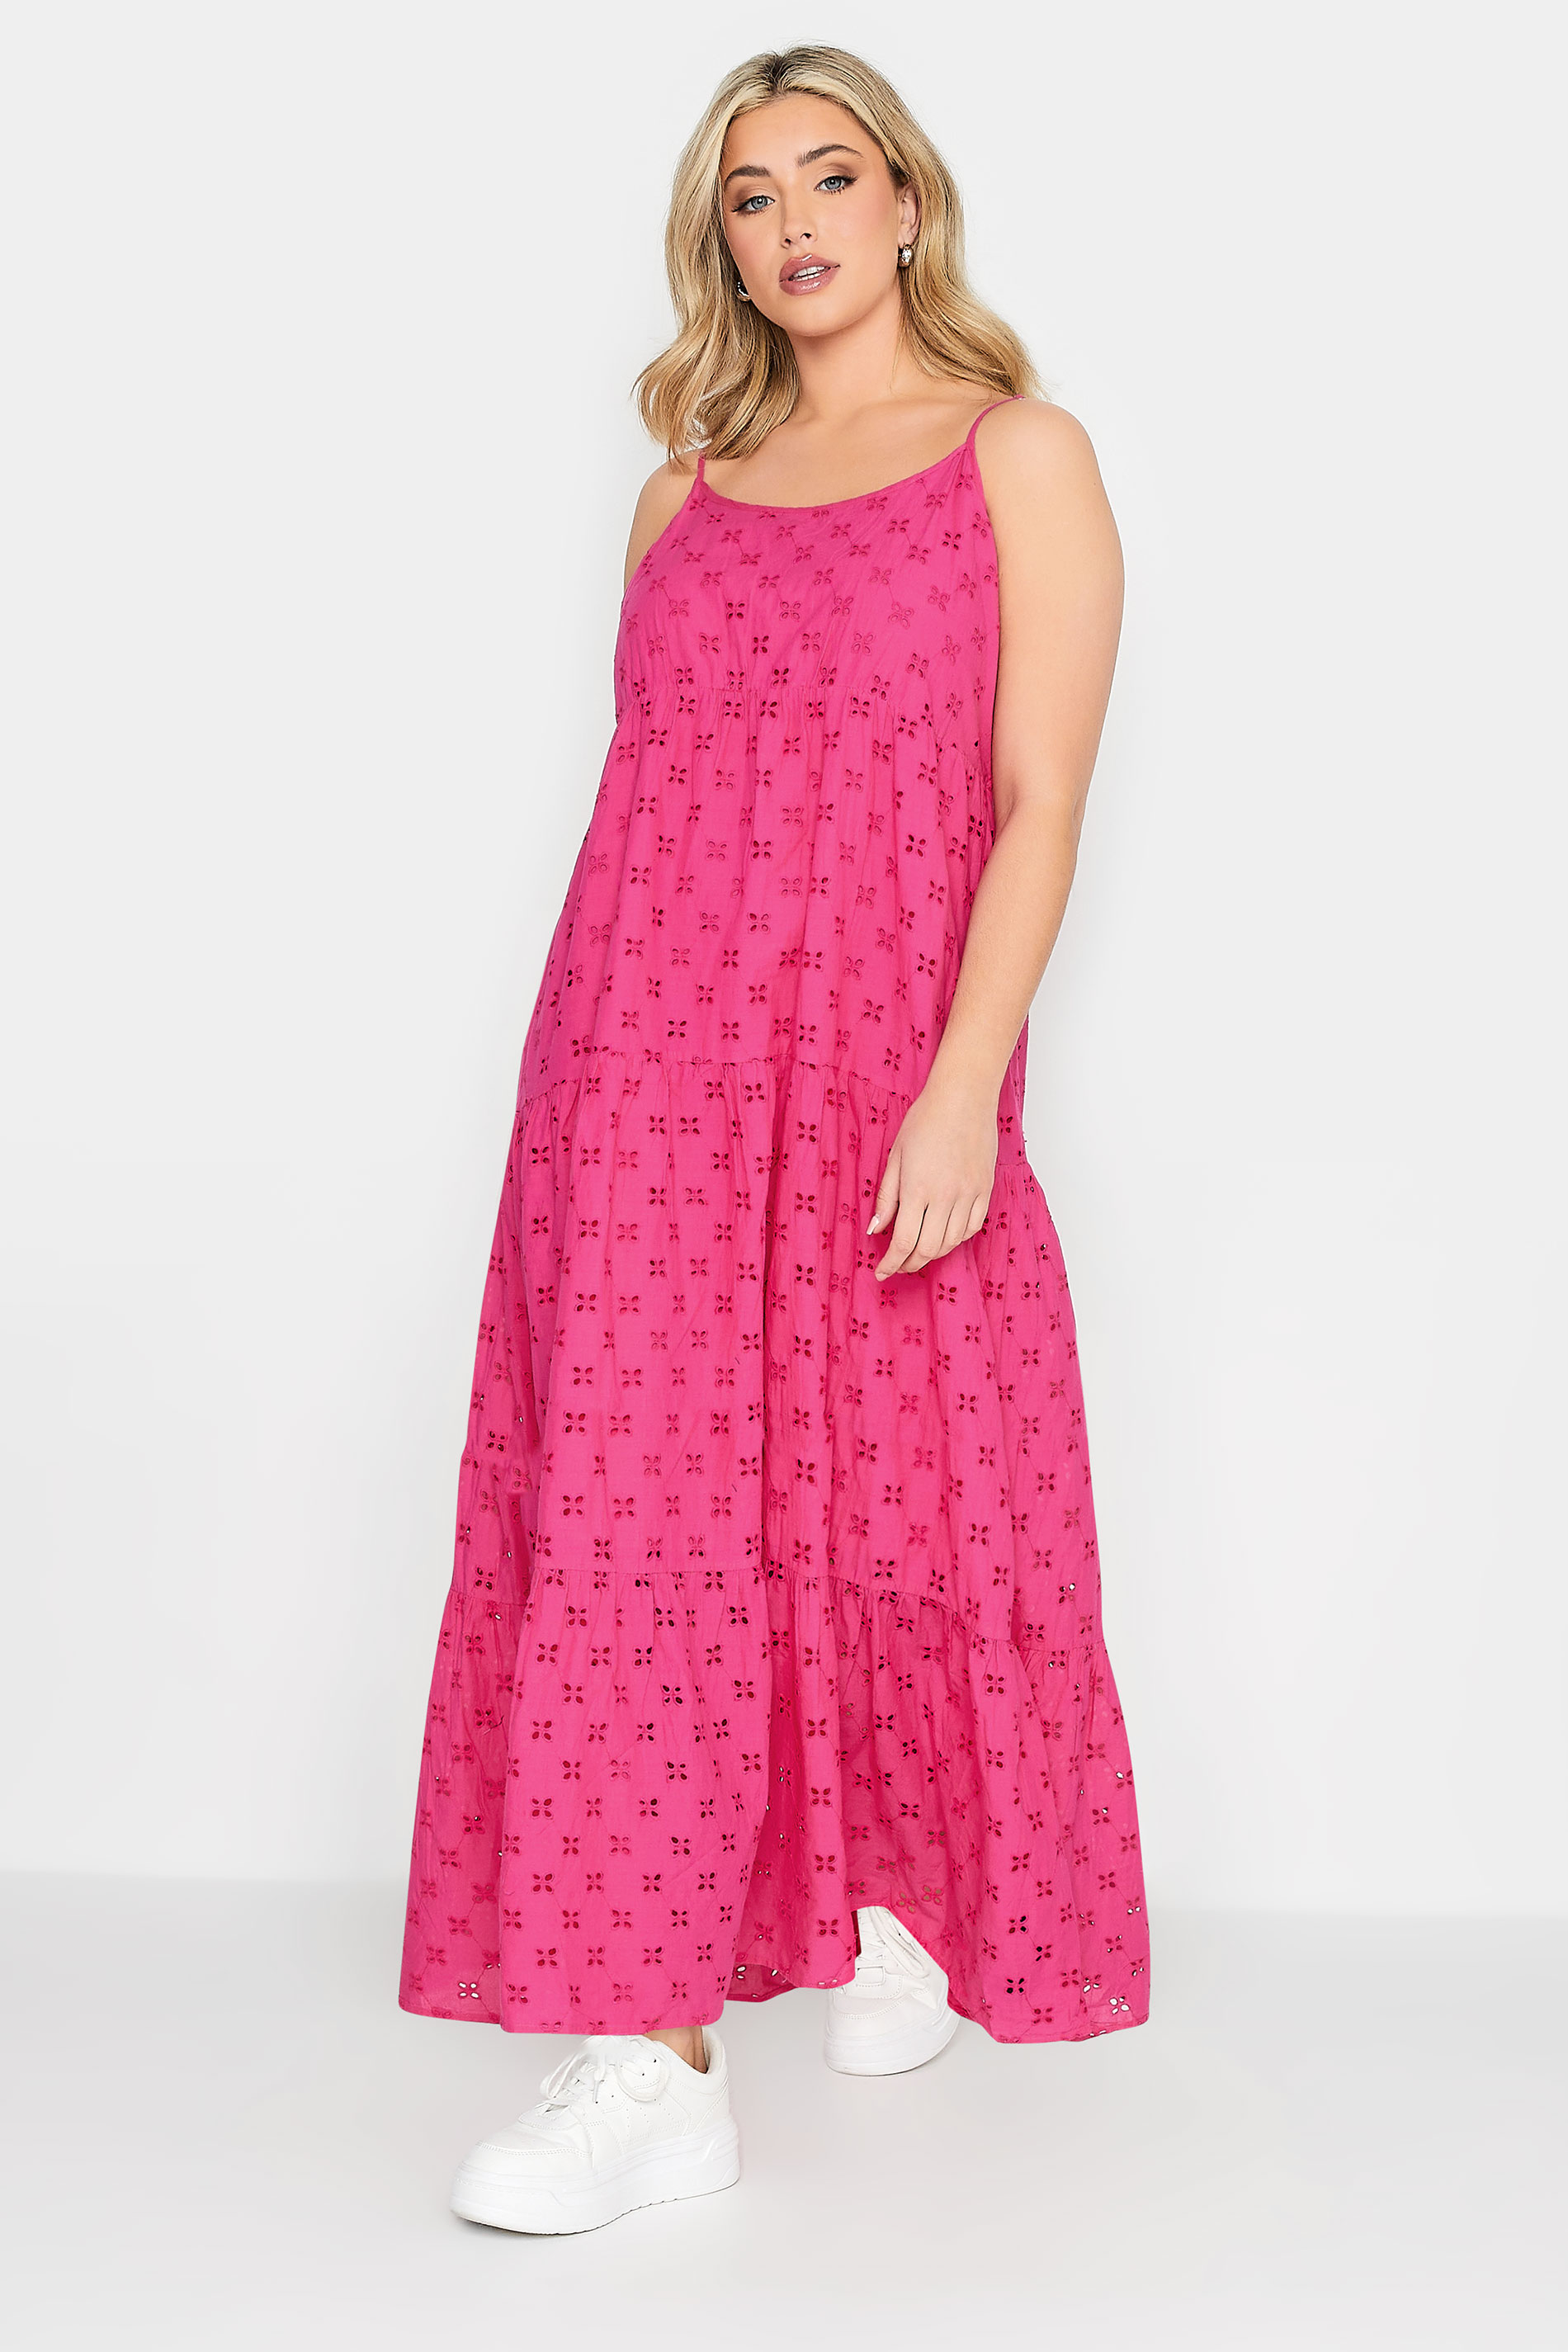 YOURS PETITE Plus Size Hot Pink Broderie Anglaise Strap Maxi Dress | Yours Clothing 1